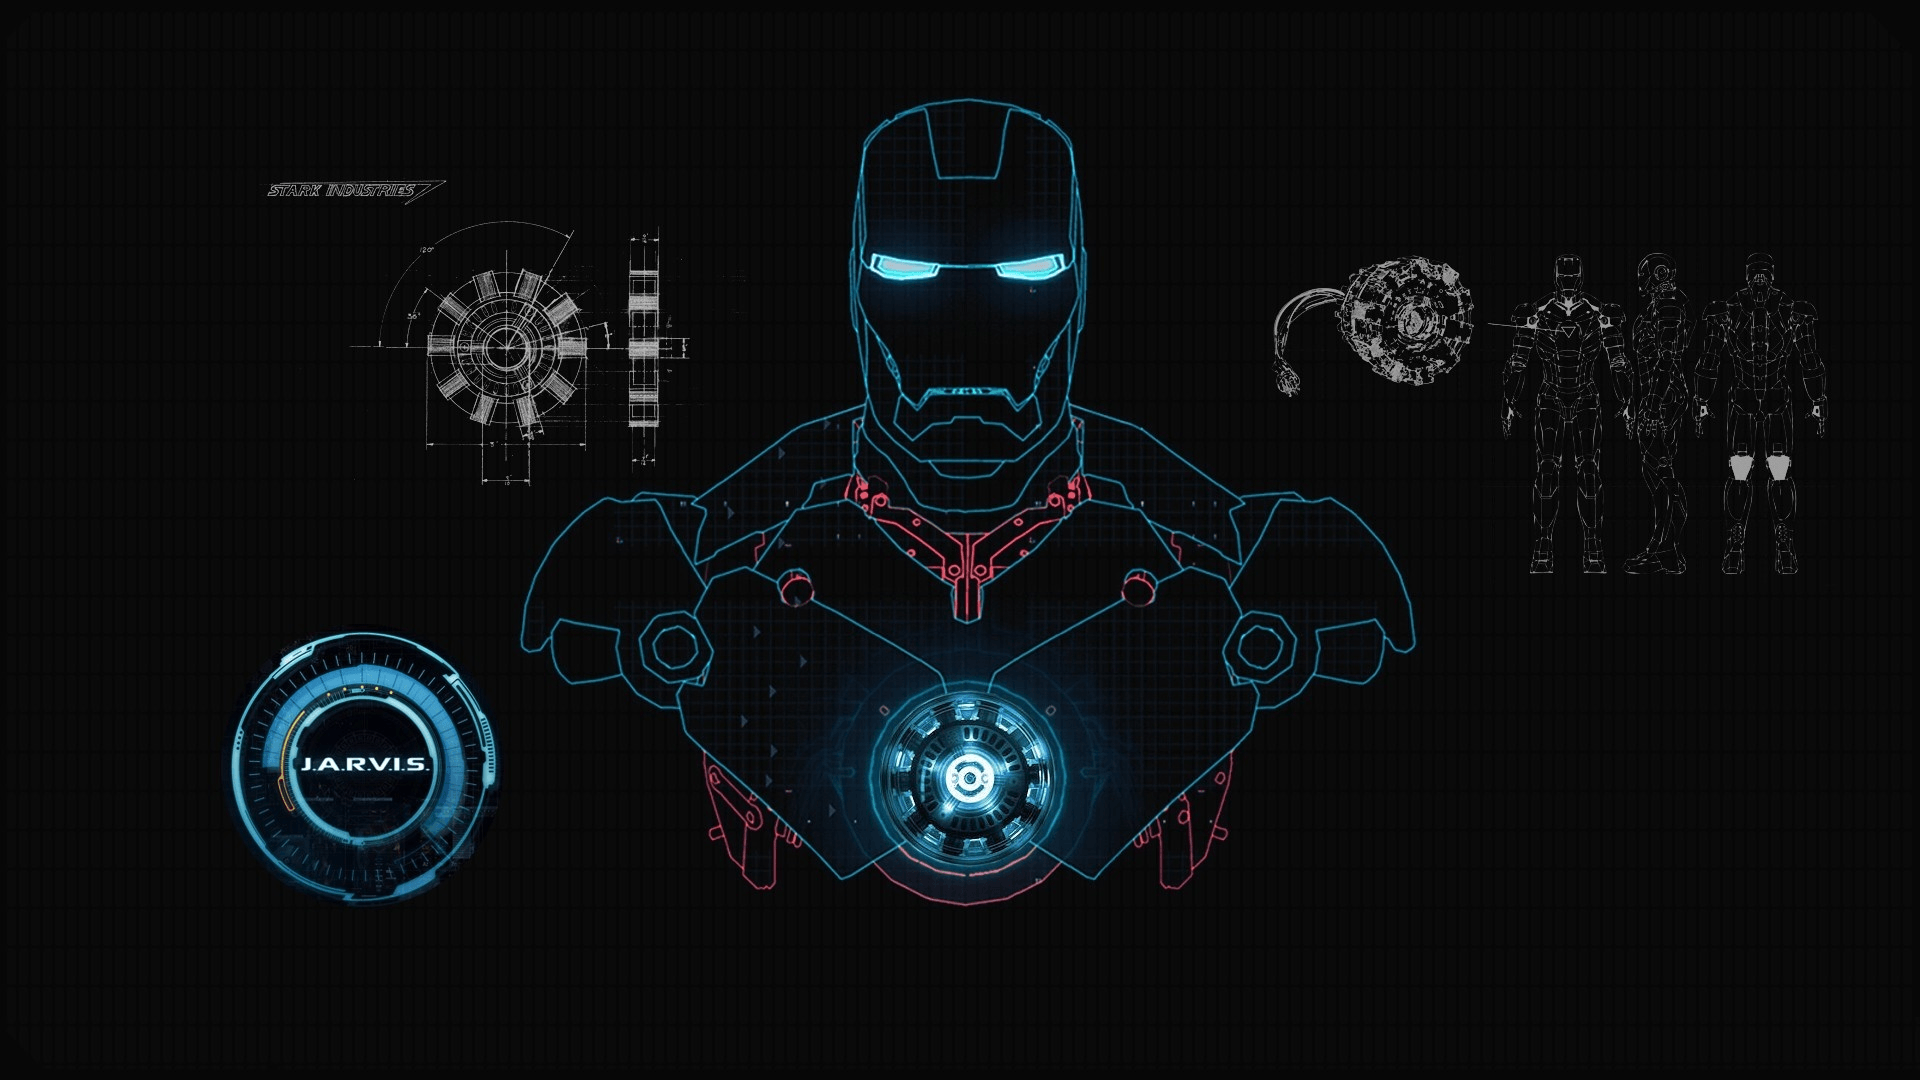 HD and 4k wallpaper of Jarvis